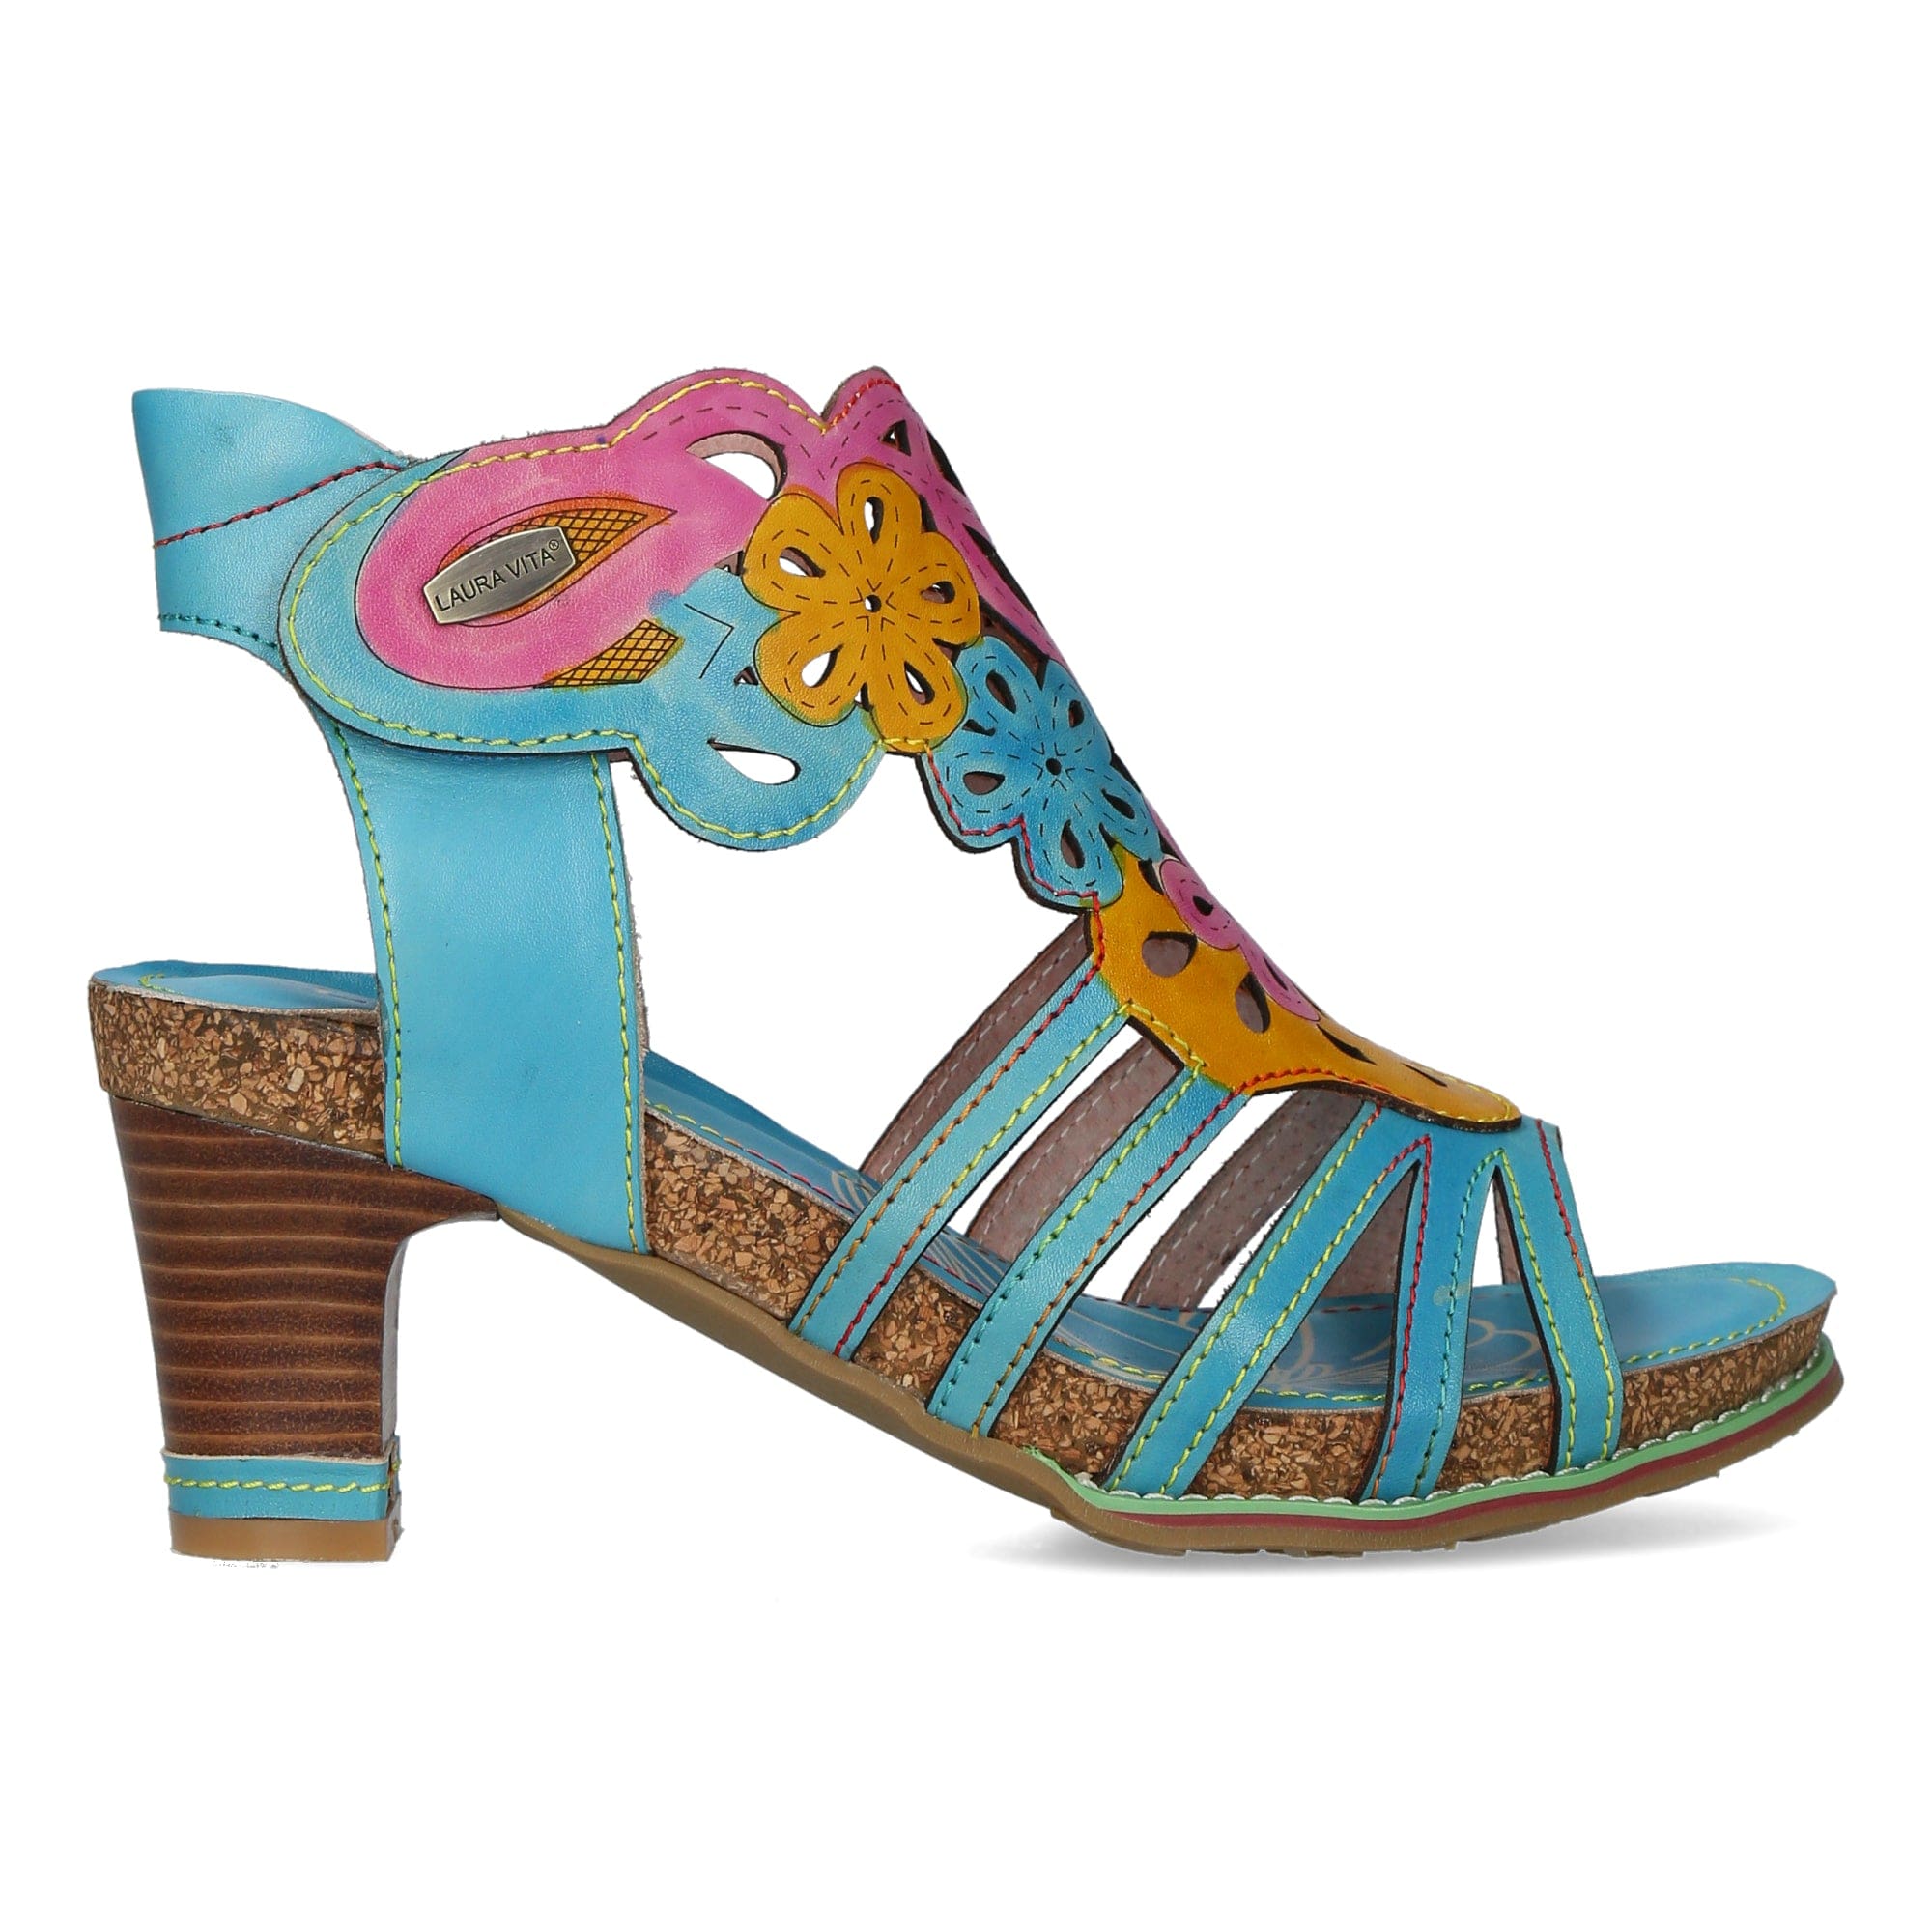 Chaussure NOAO 11 - 35 / Turquoise - Sandale